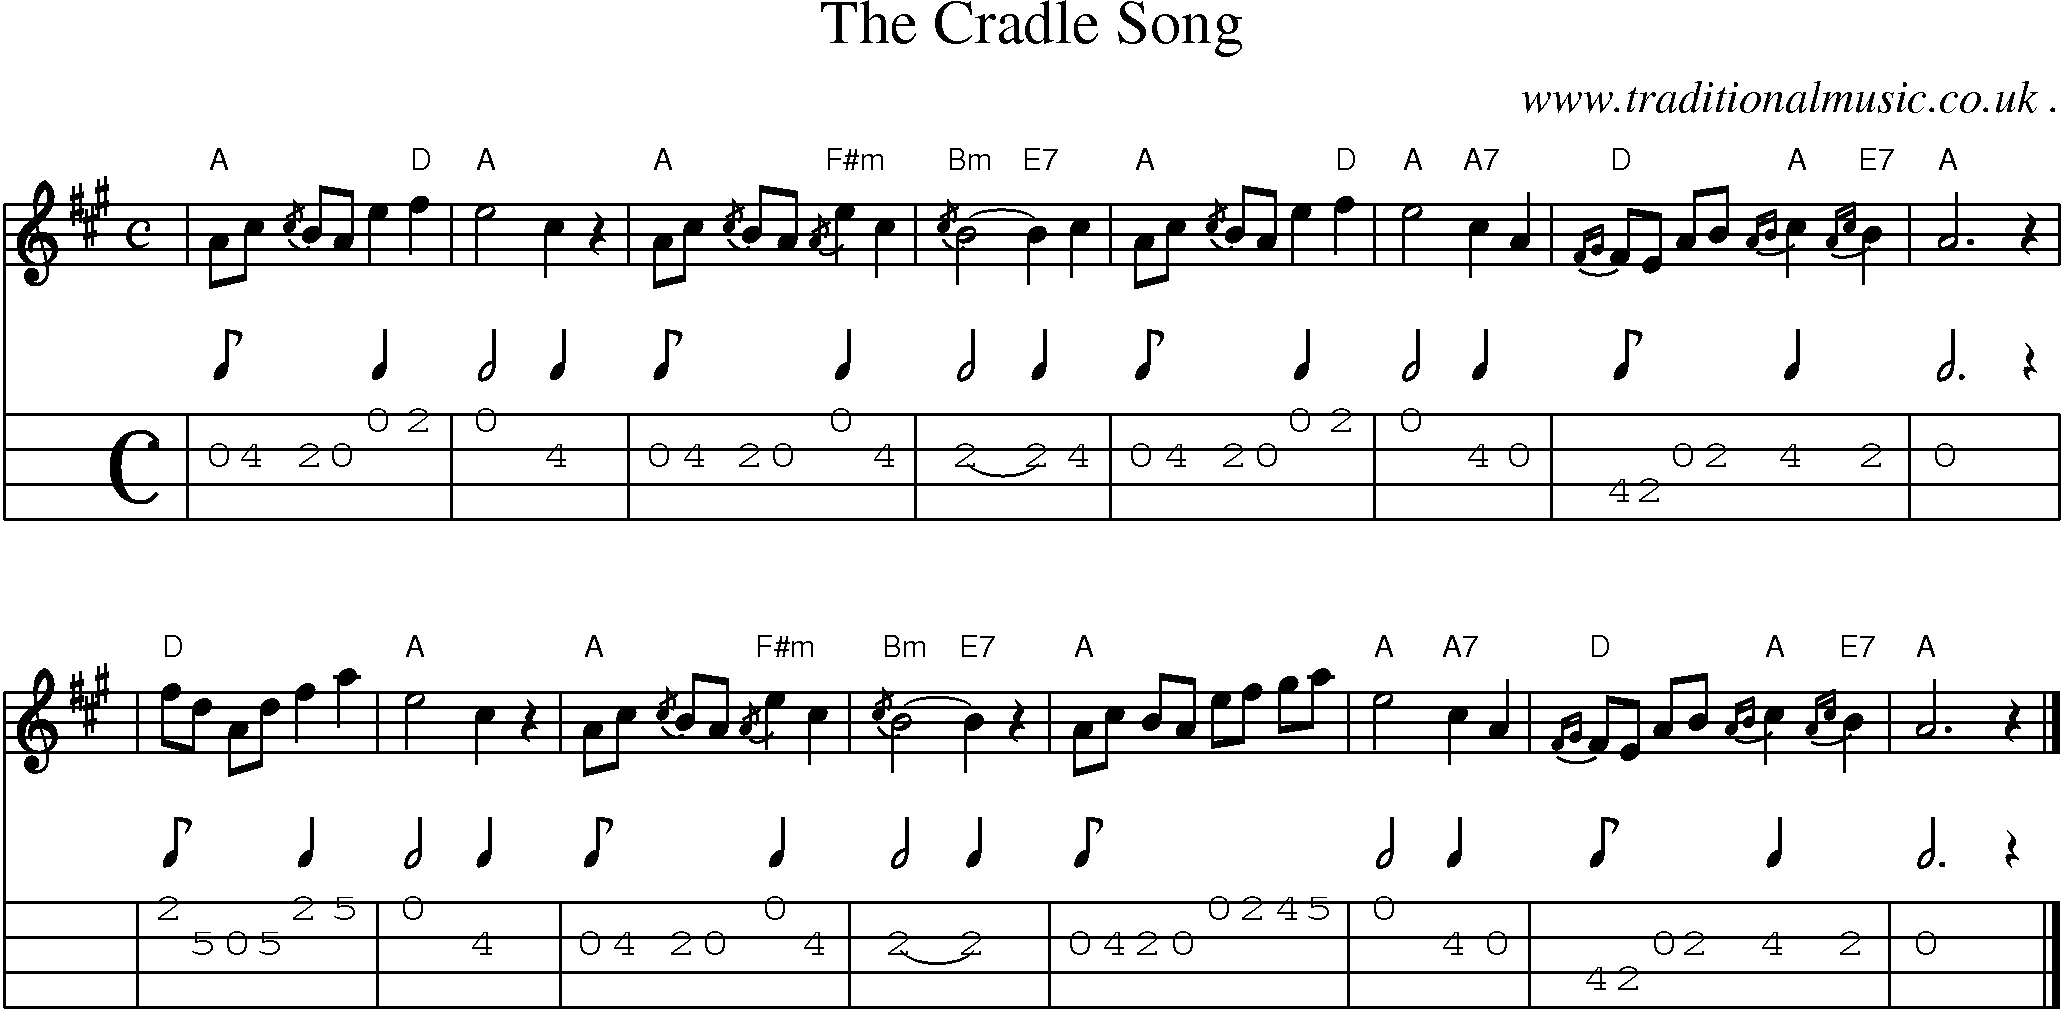 Sheet-music  score, Chords and Mandolin Tabs for The Cradle Song